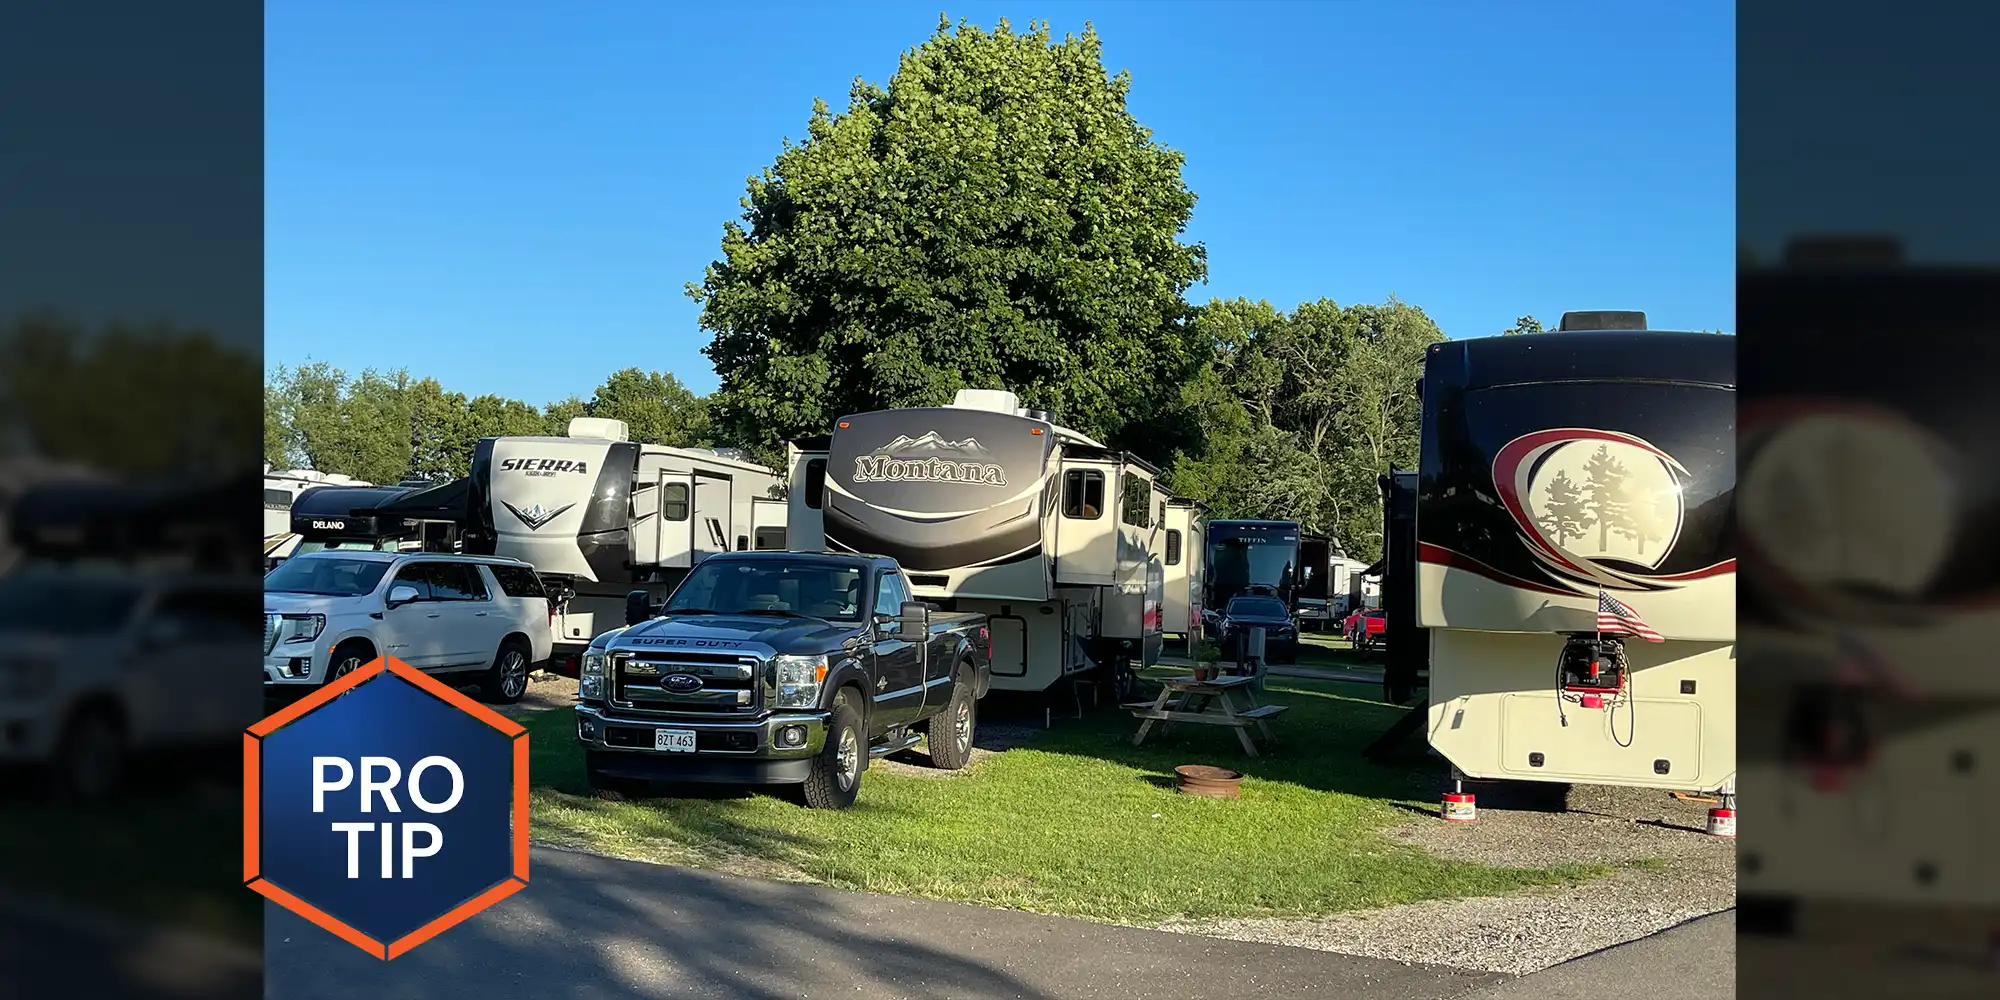 full view of a large grassy, tree-covered area filled with parked RV and trailers